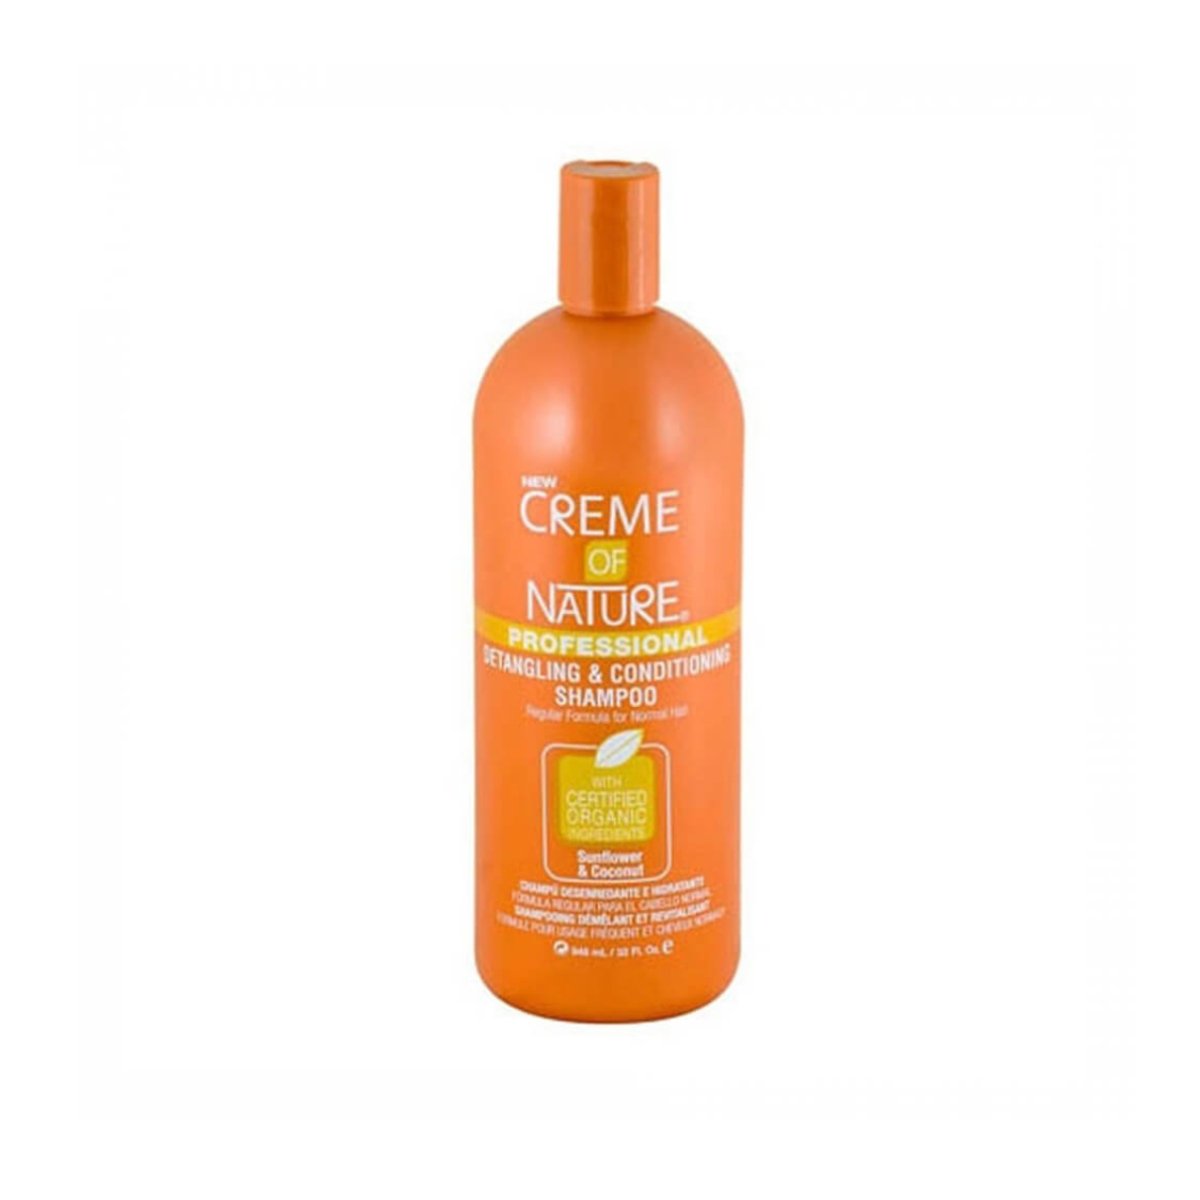 Creme Of Nature Professional Detangling & Conditioning Shampoo 591ml - CosFair GmbH